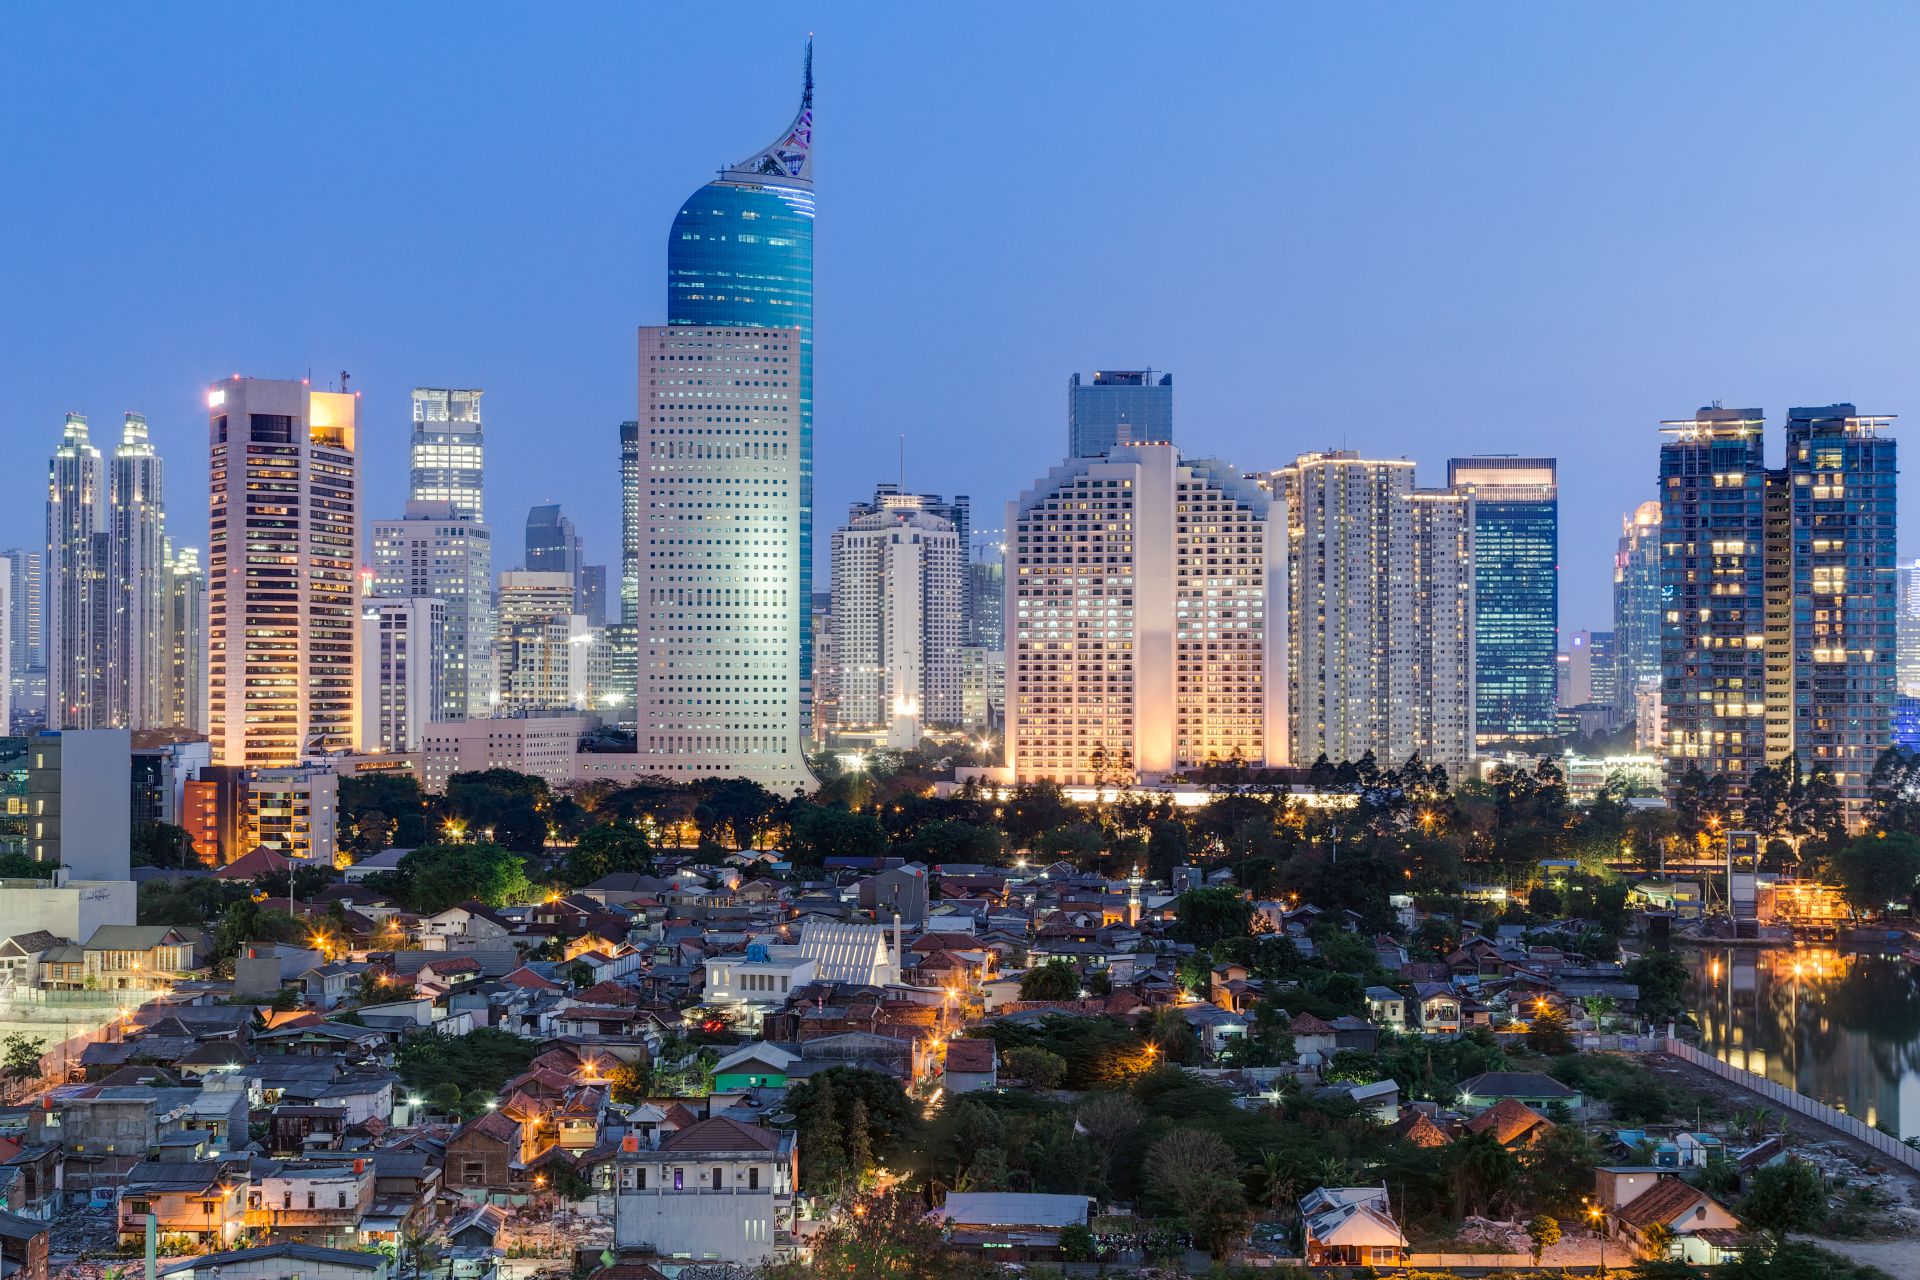 Jakarta downtown with tall buildings